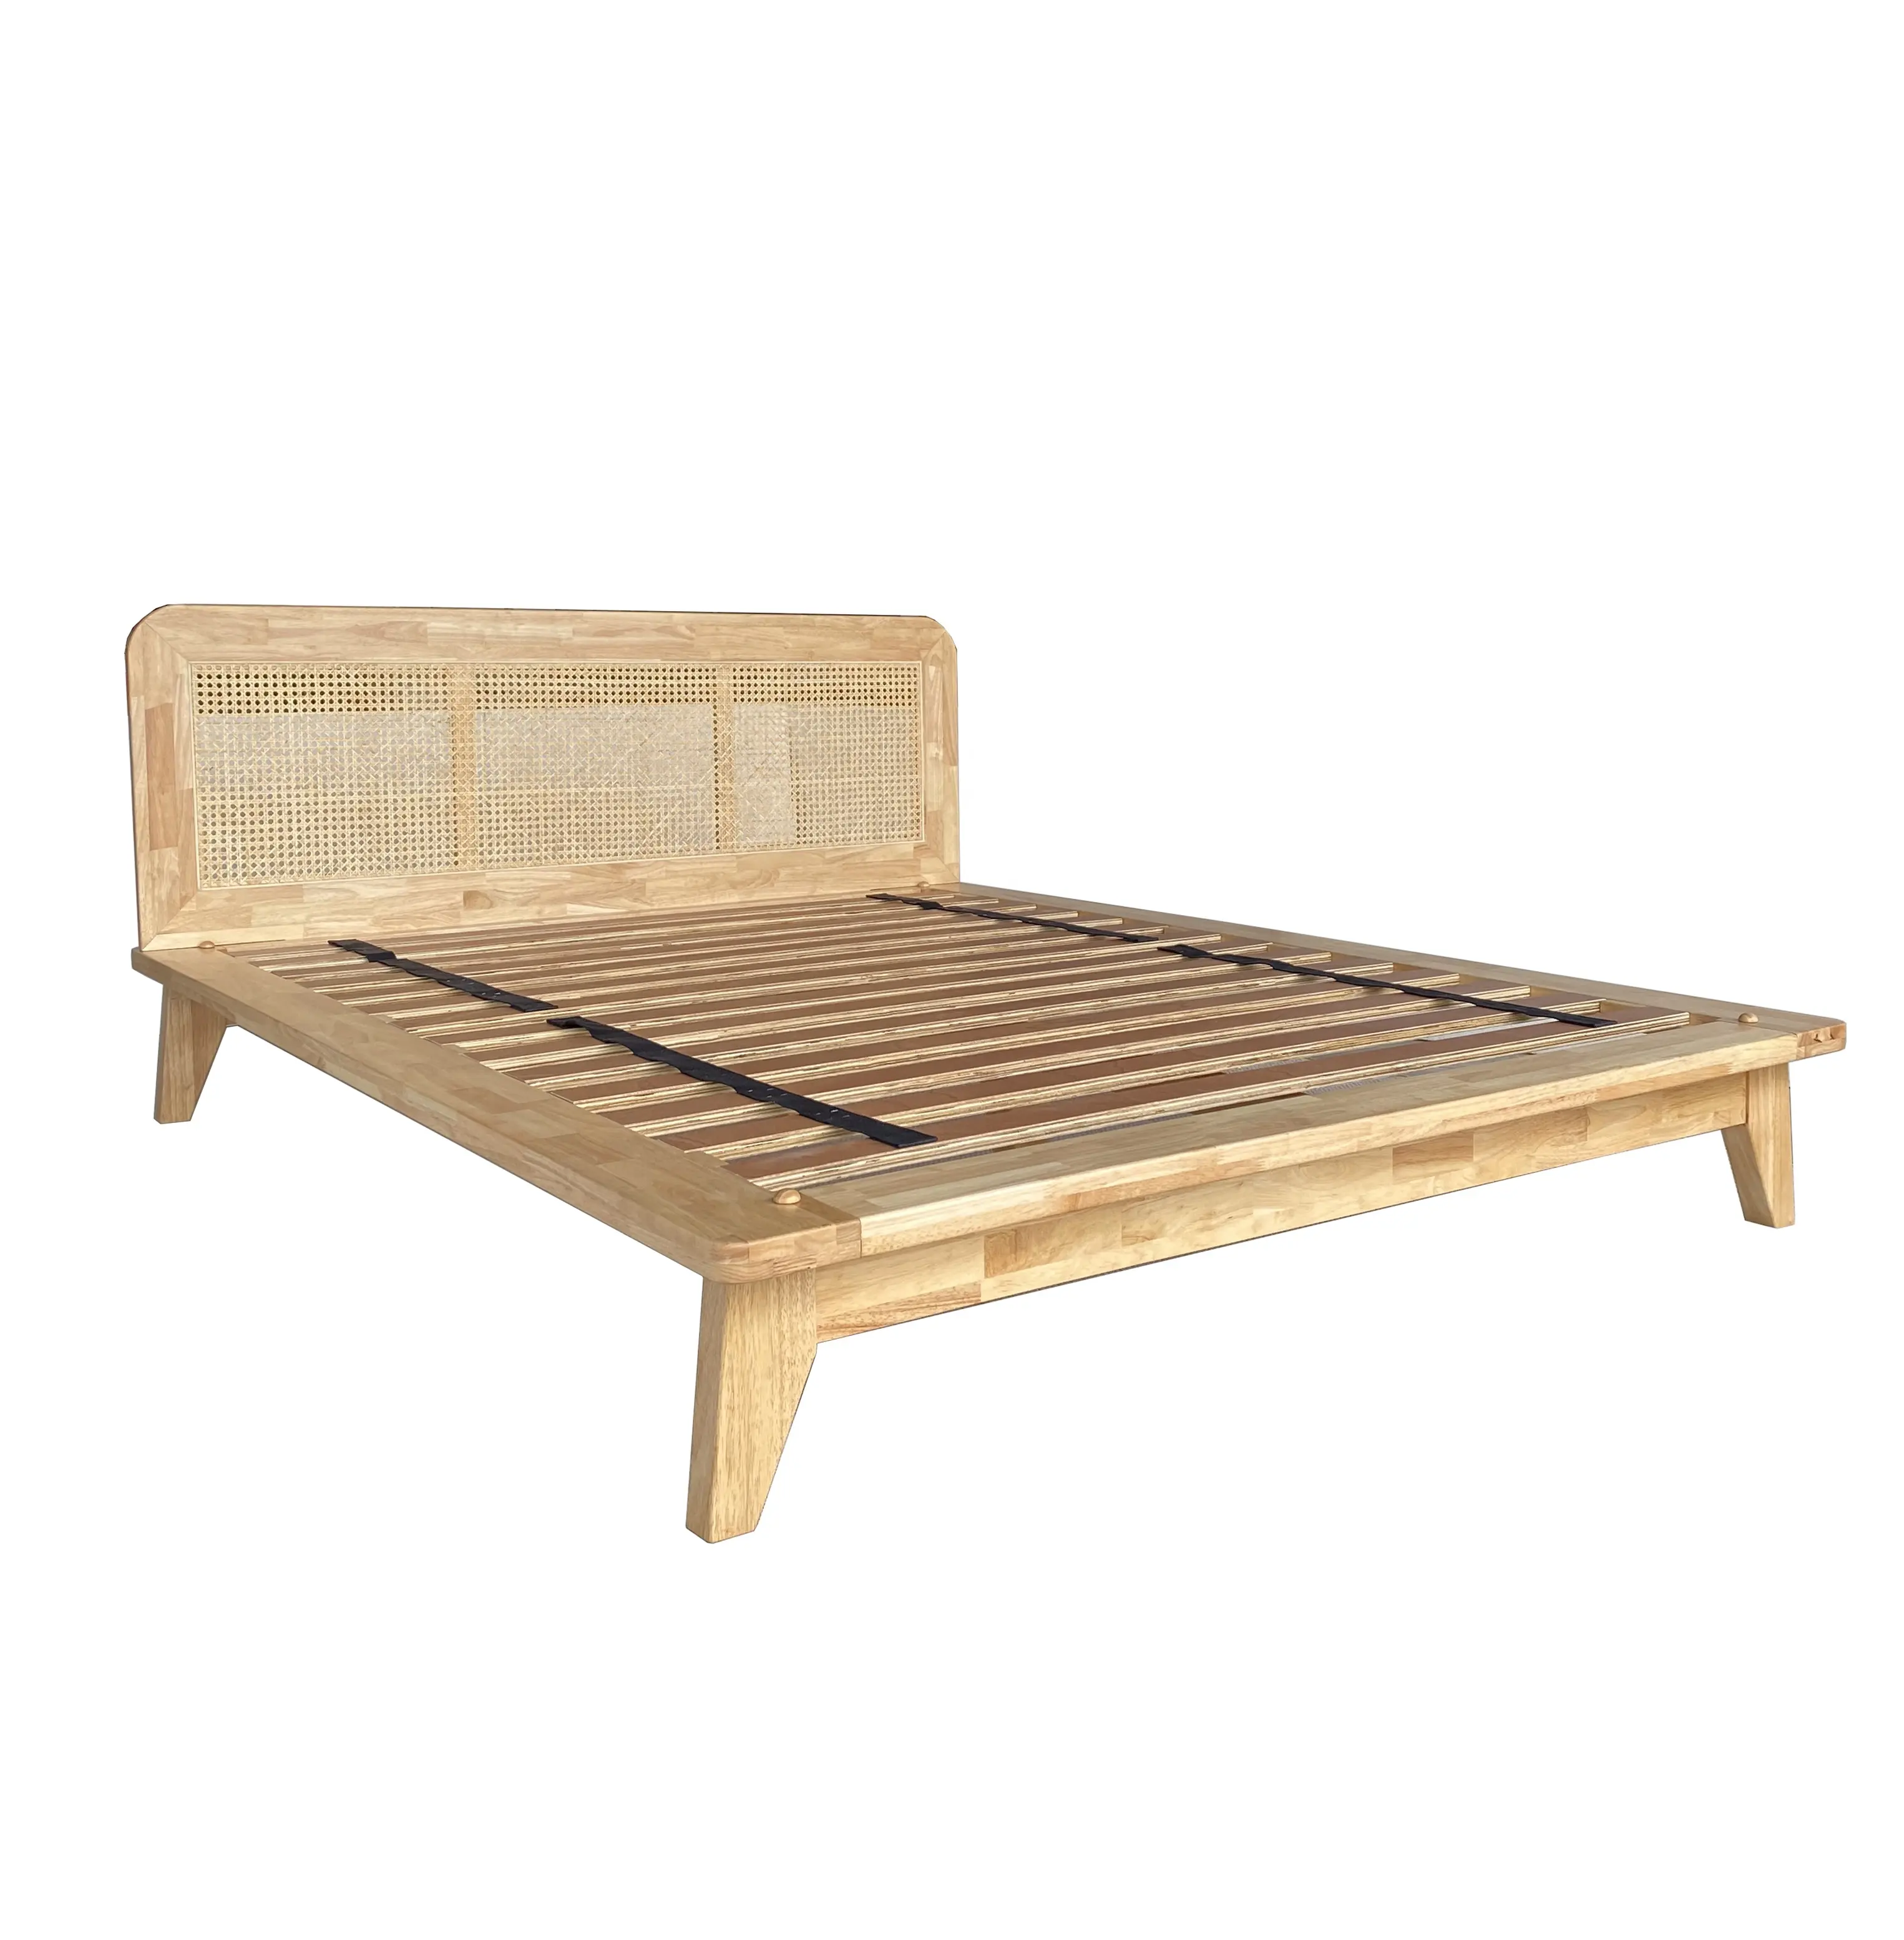 Made in Vietnam Superior Workmanship Modern Furniture No Tool Needed to Assemble Solid Rubber Wood Bed